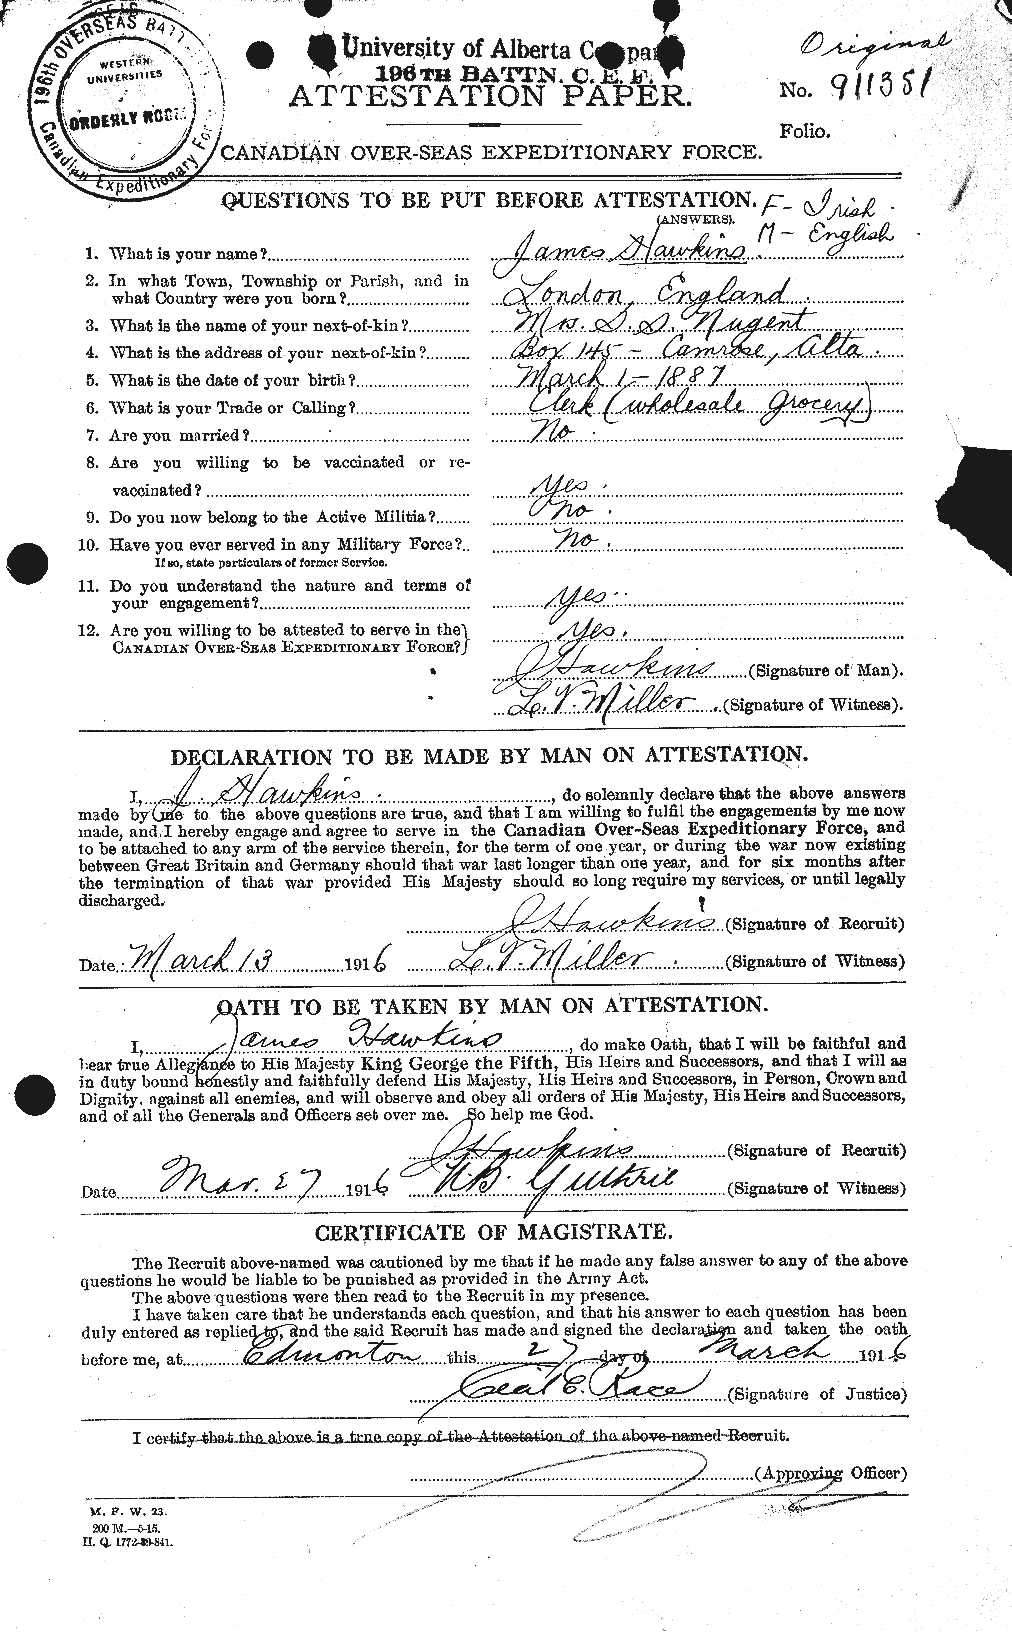 Personnel Records of the First World War - CEF 387161a